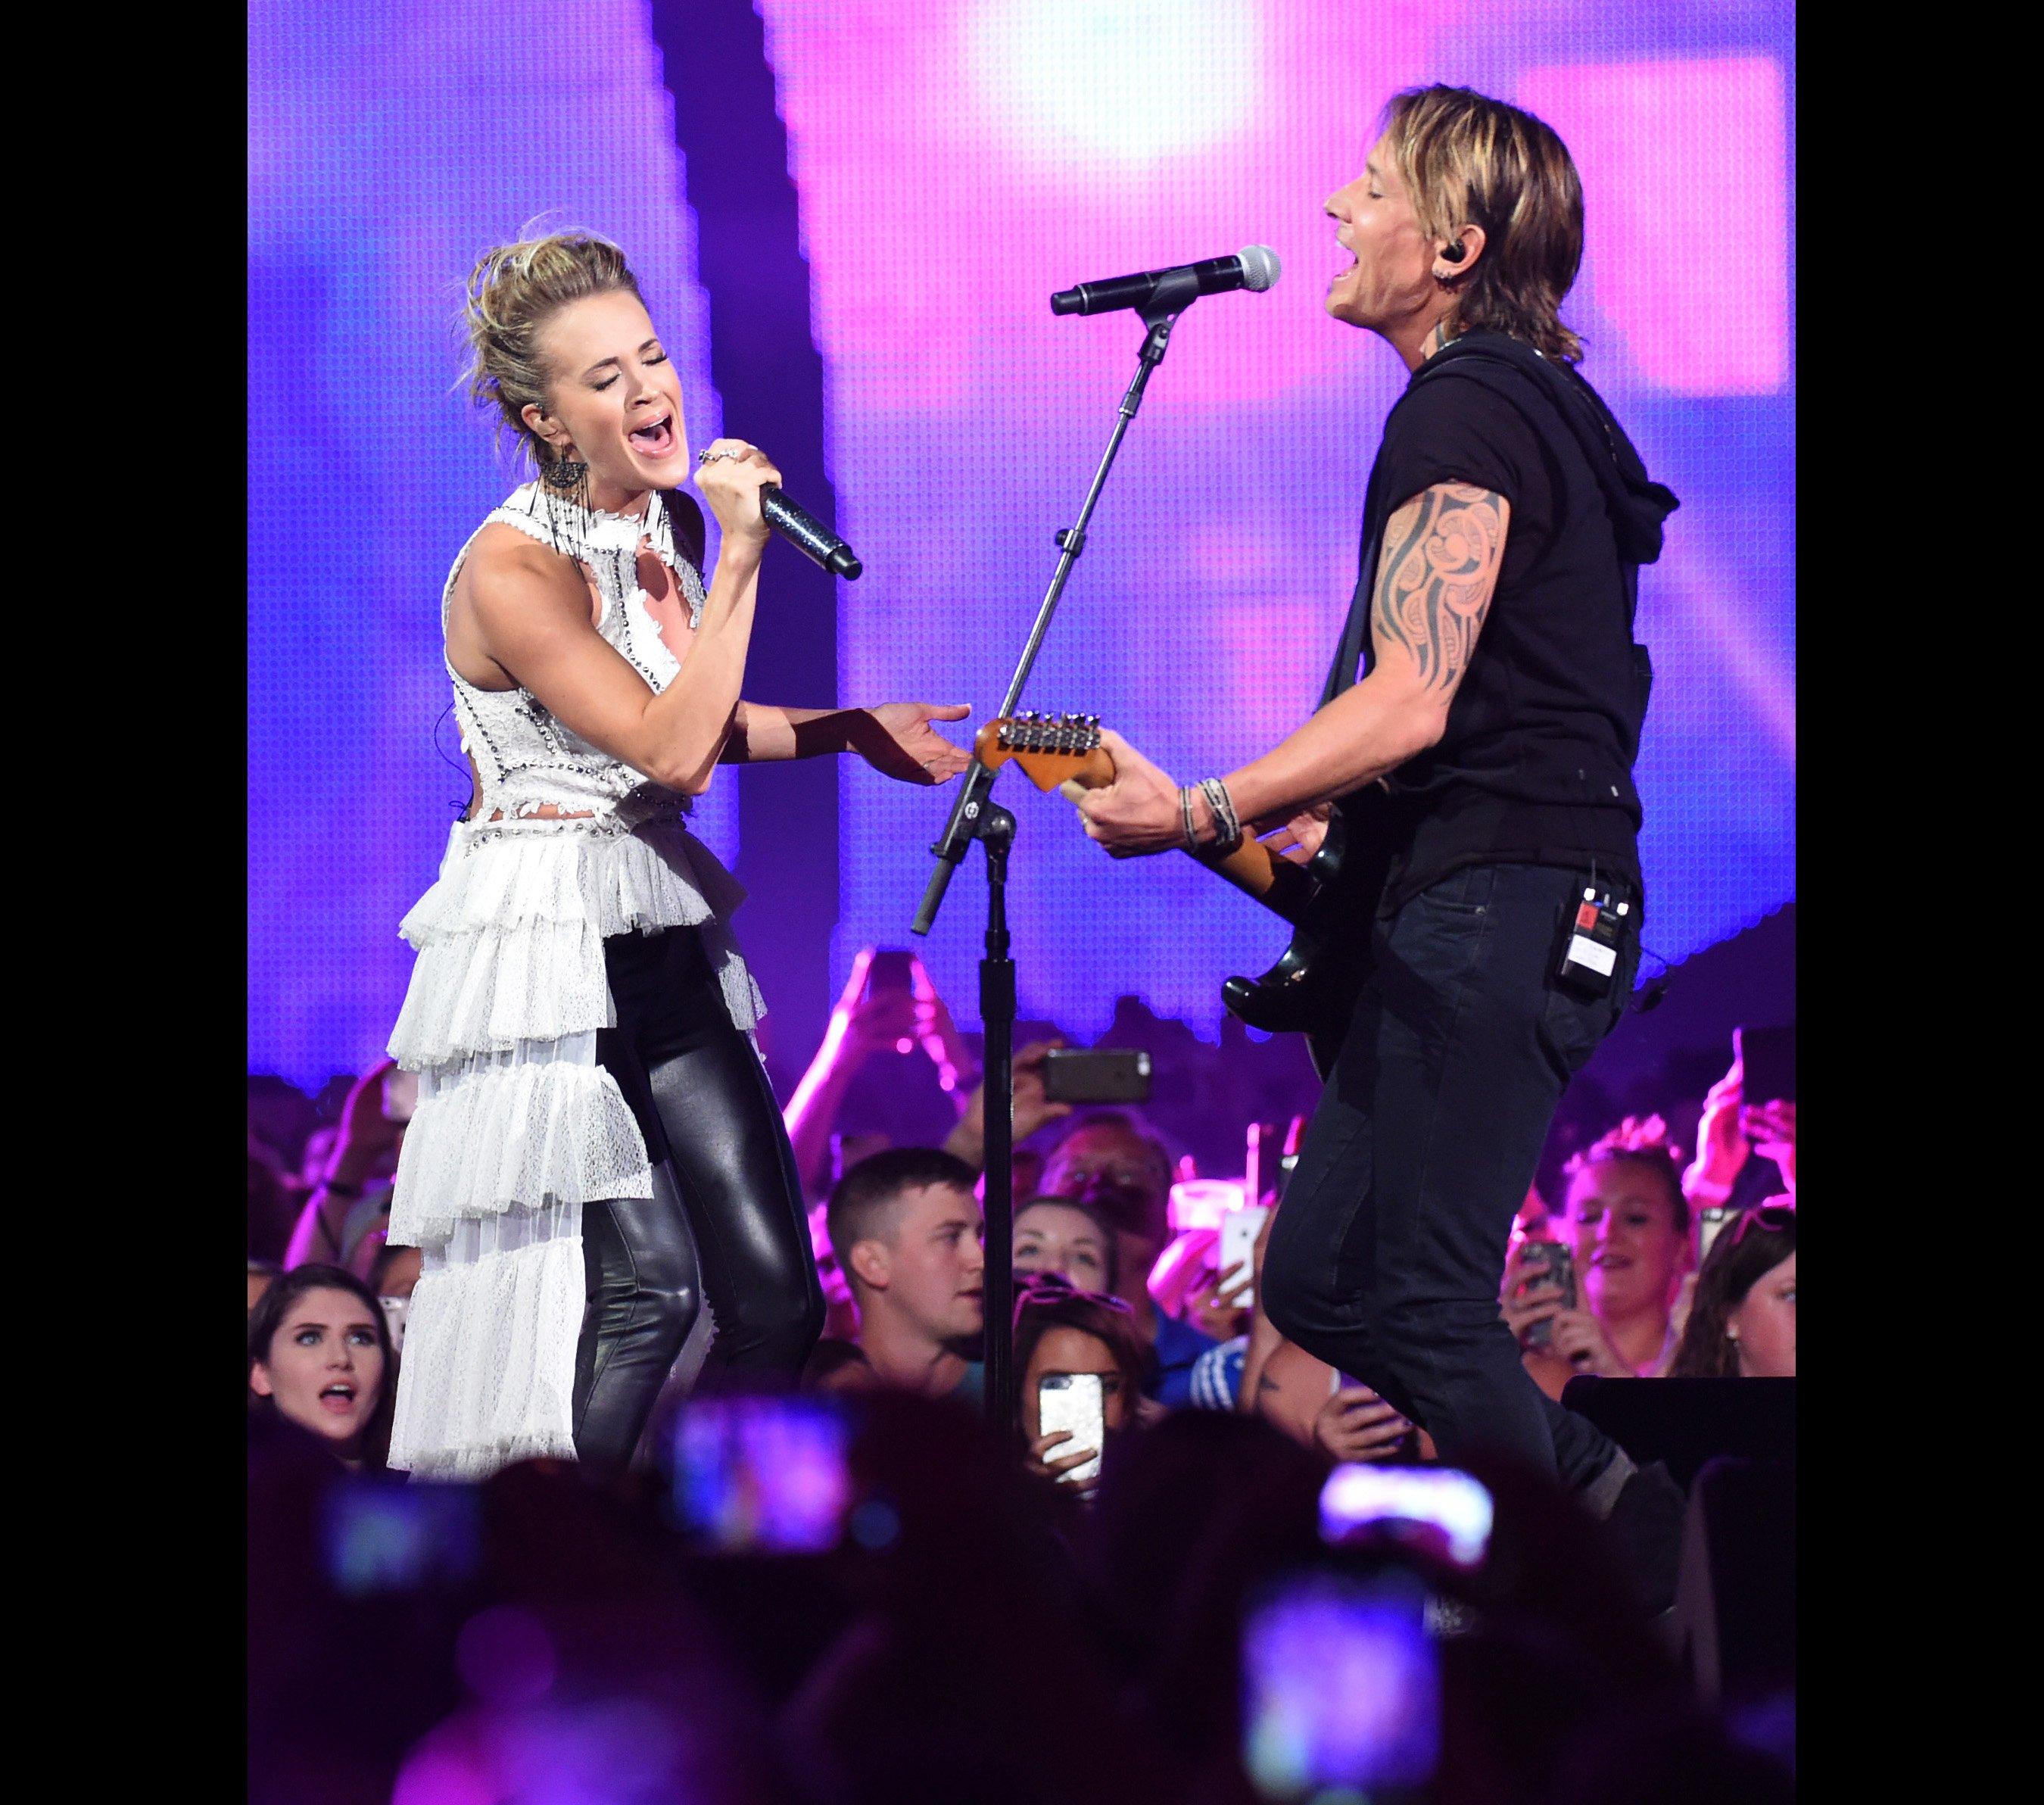 Carrie Underwood and Keith Urban perform at the 2017 CMT Awards